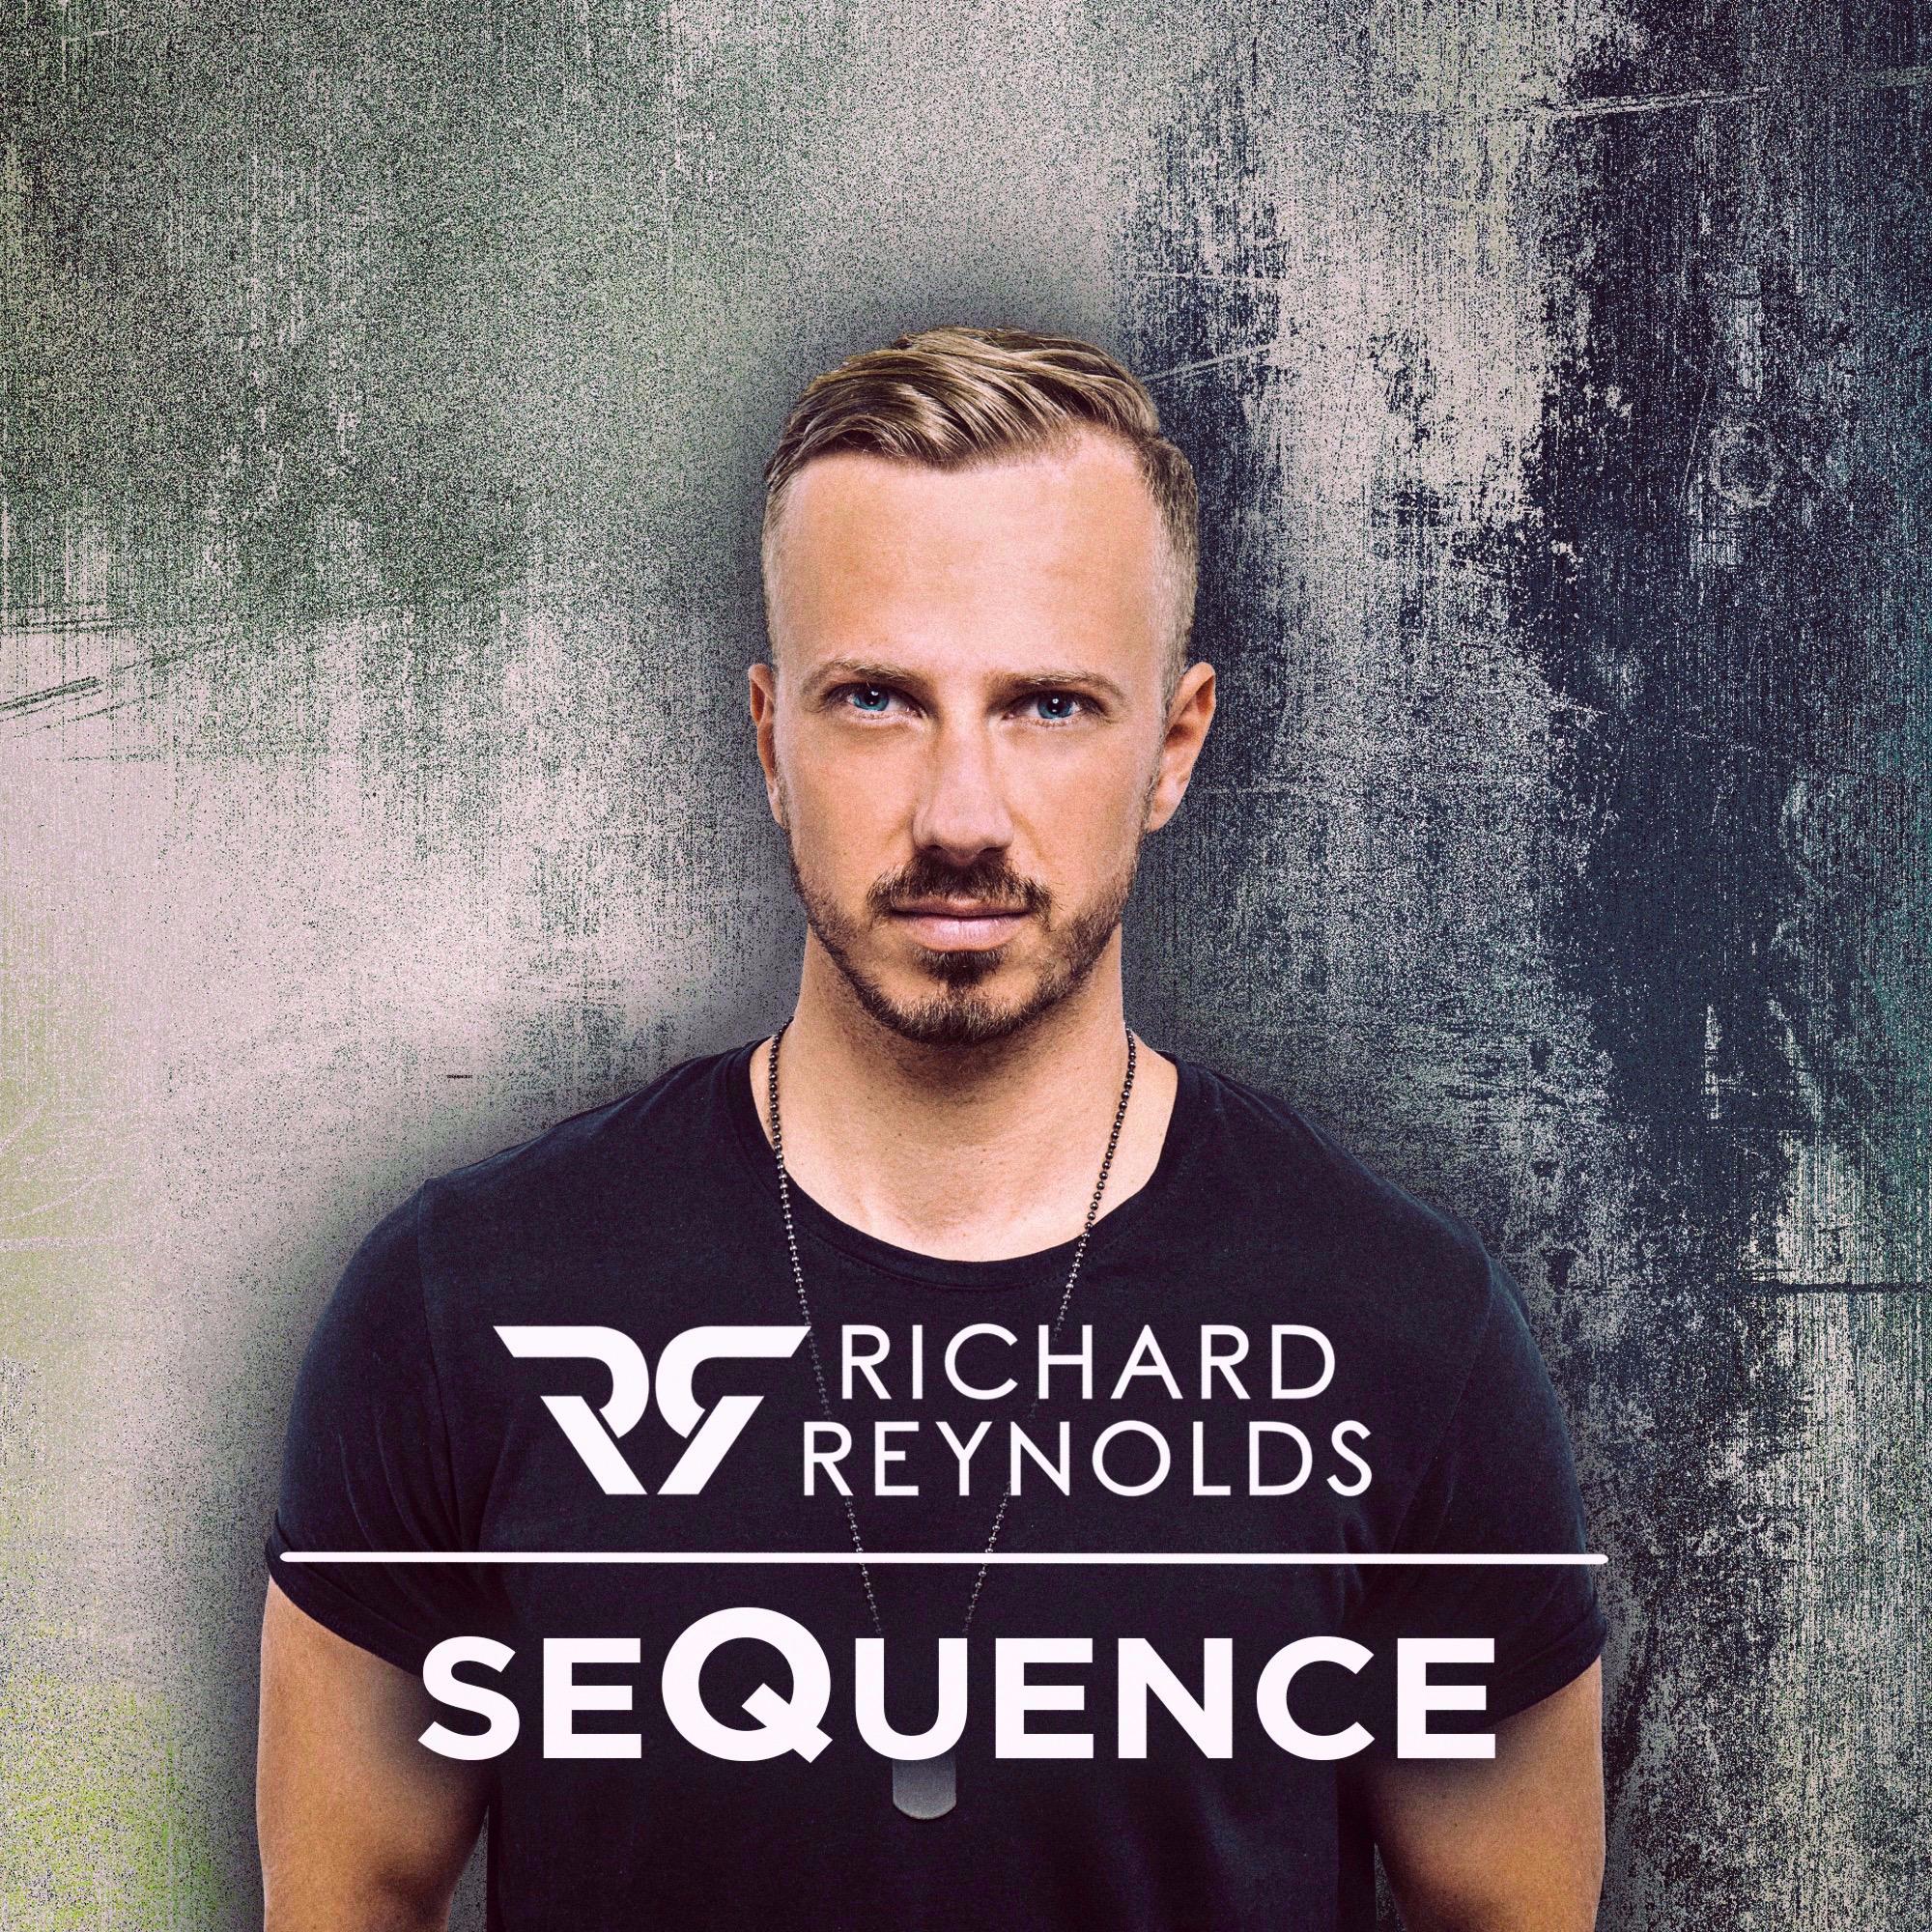 SEQUENCE by Richard Reynolds